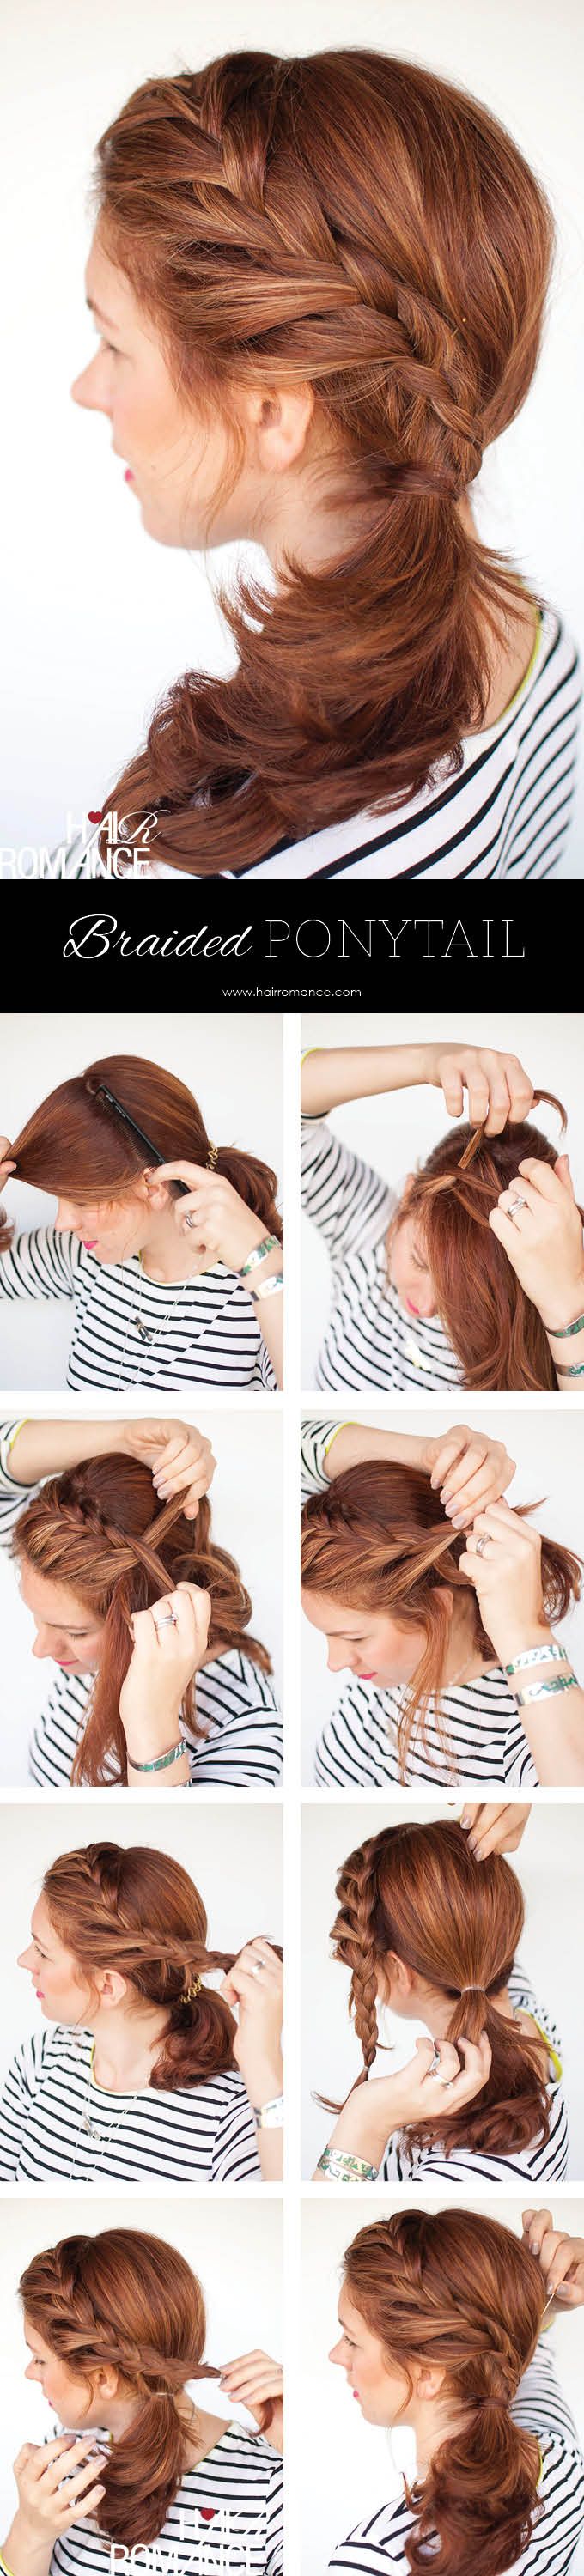 20 Fabulous Side Ponytail Hairstyles   Pretty Designs